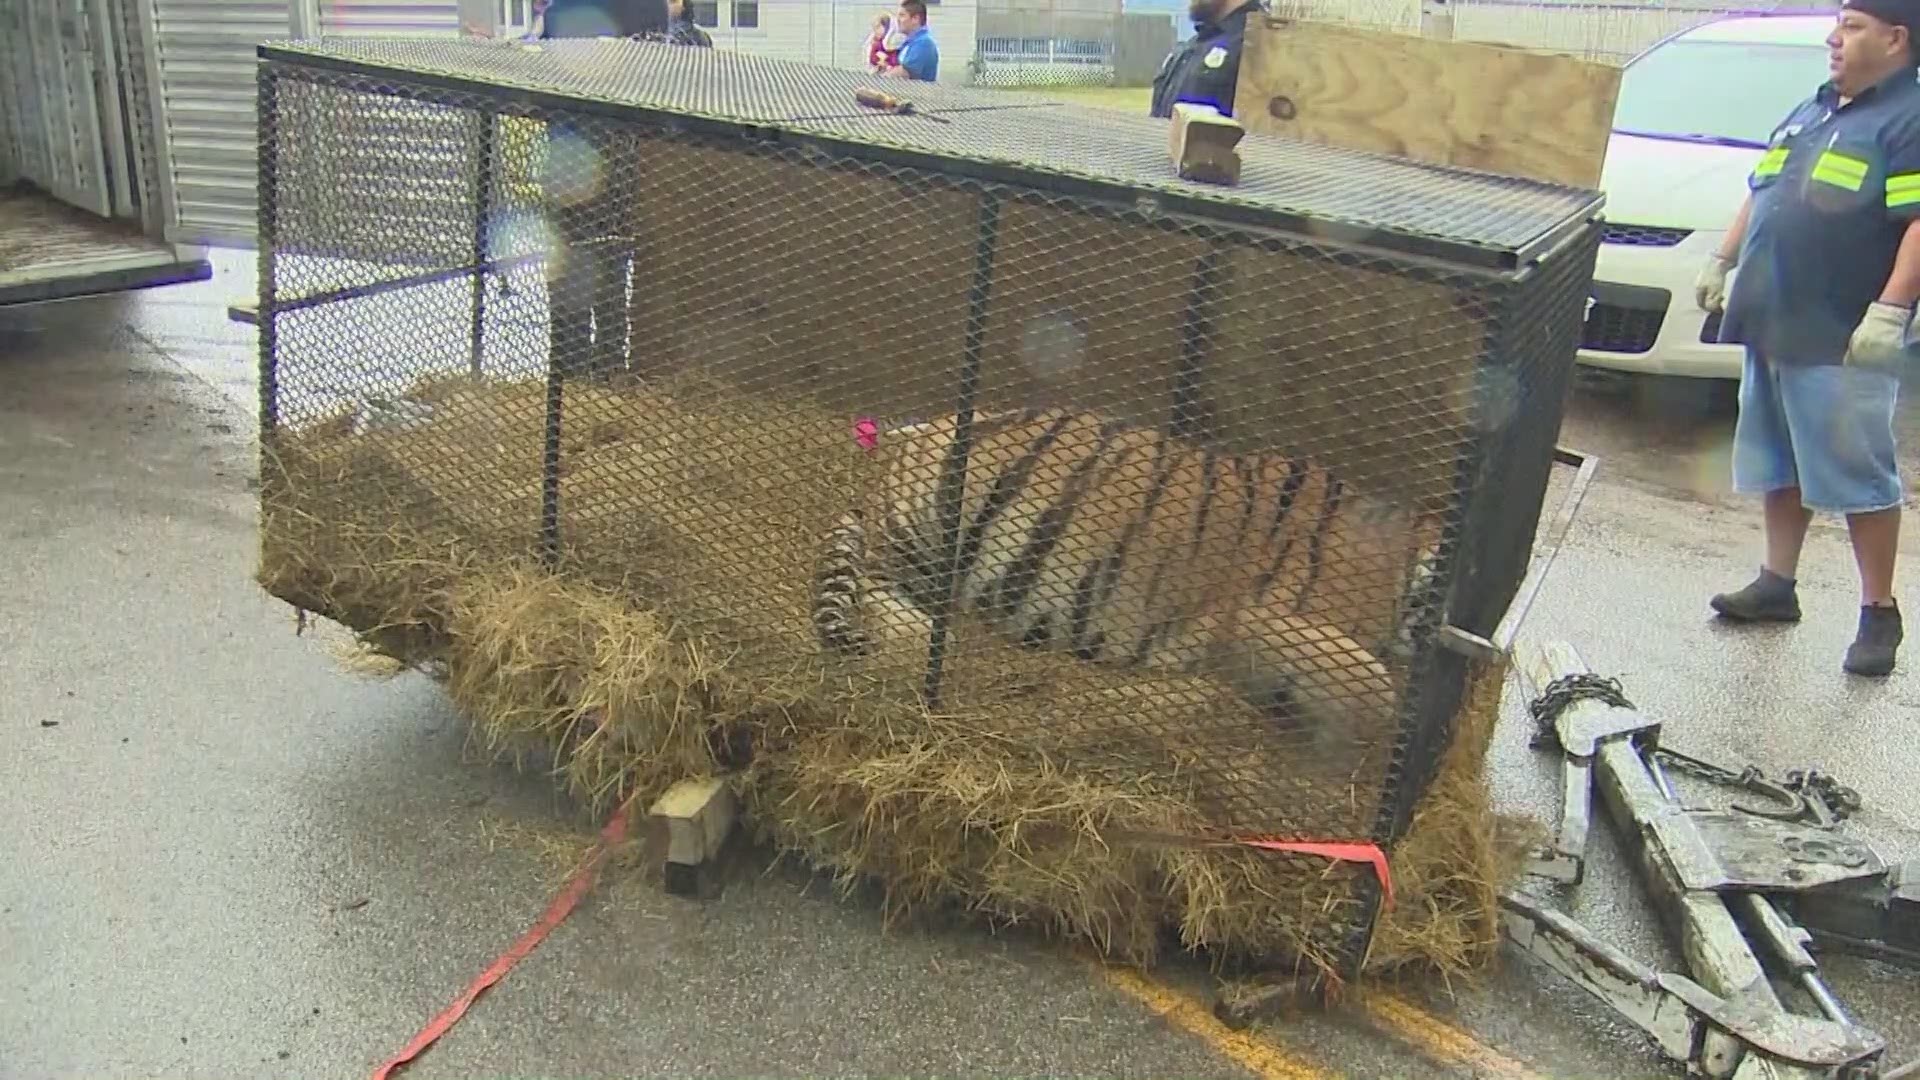 A tiger was found by neighbors Monday afternoon in a southeast Houston home.